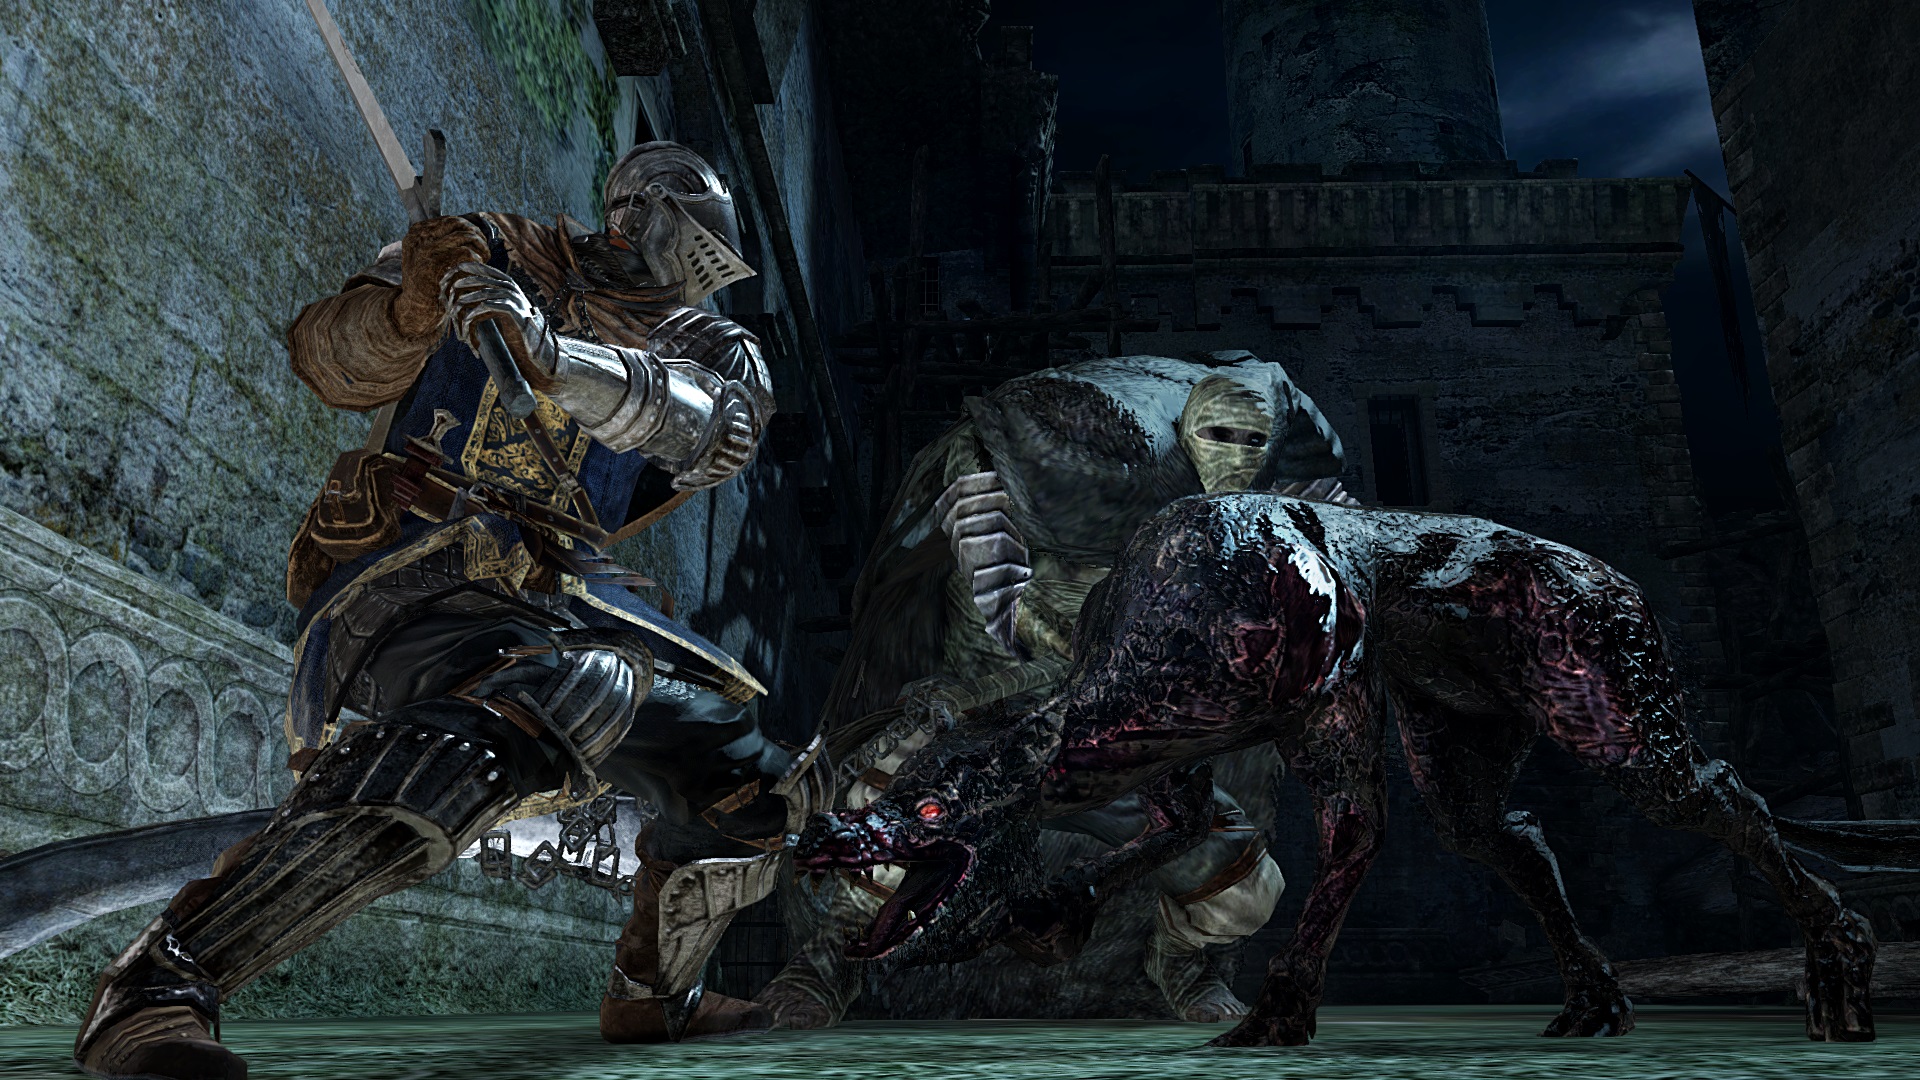 Dark Souls II Pics, Video Game Collection